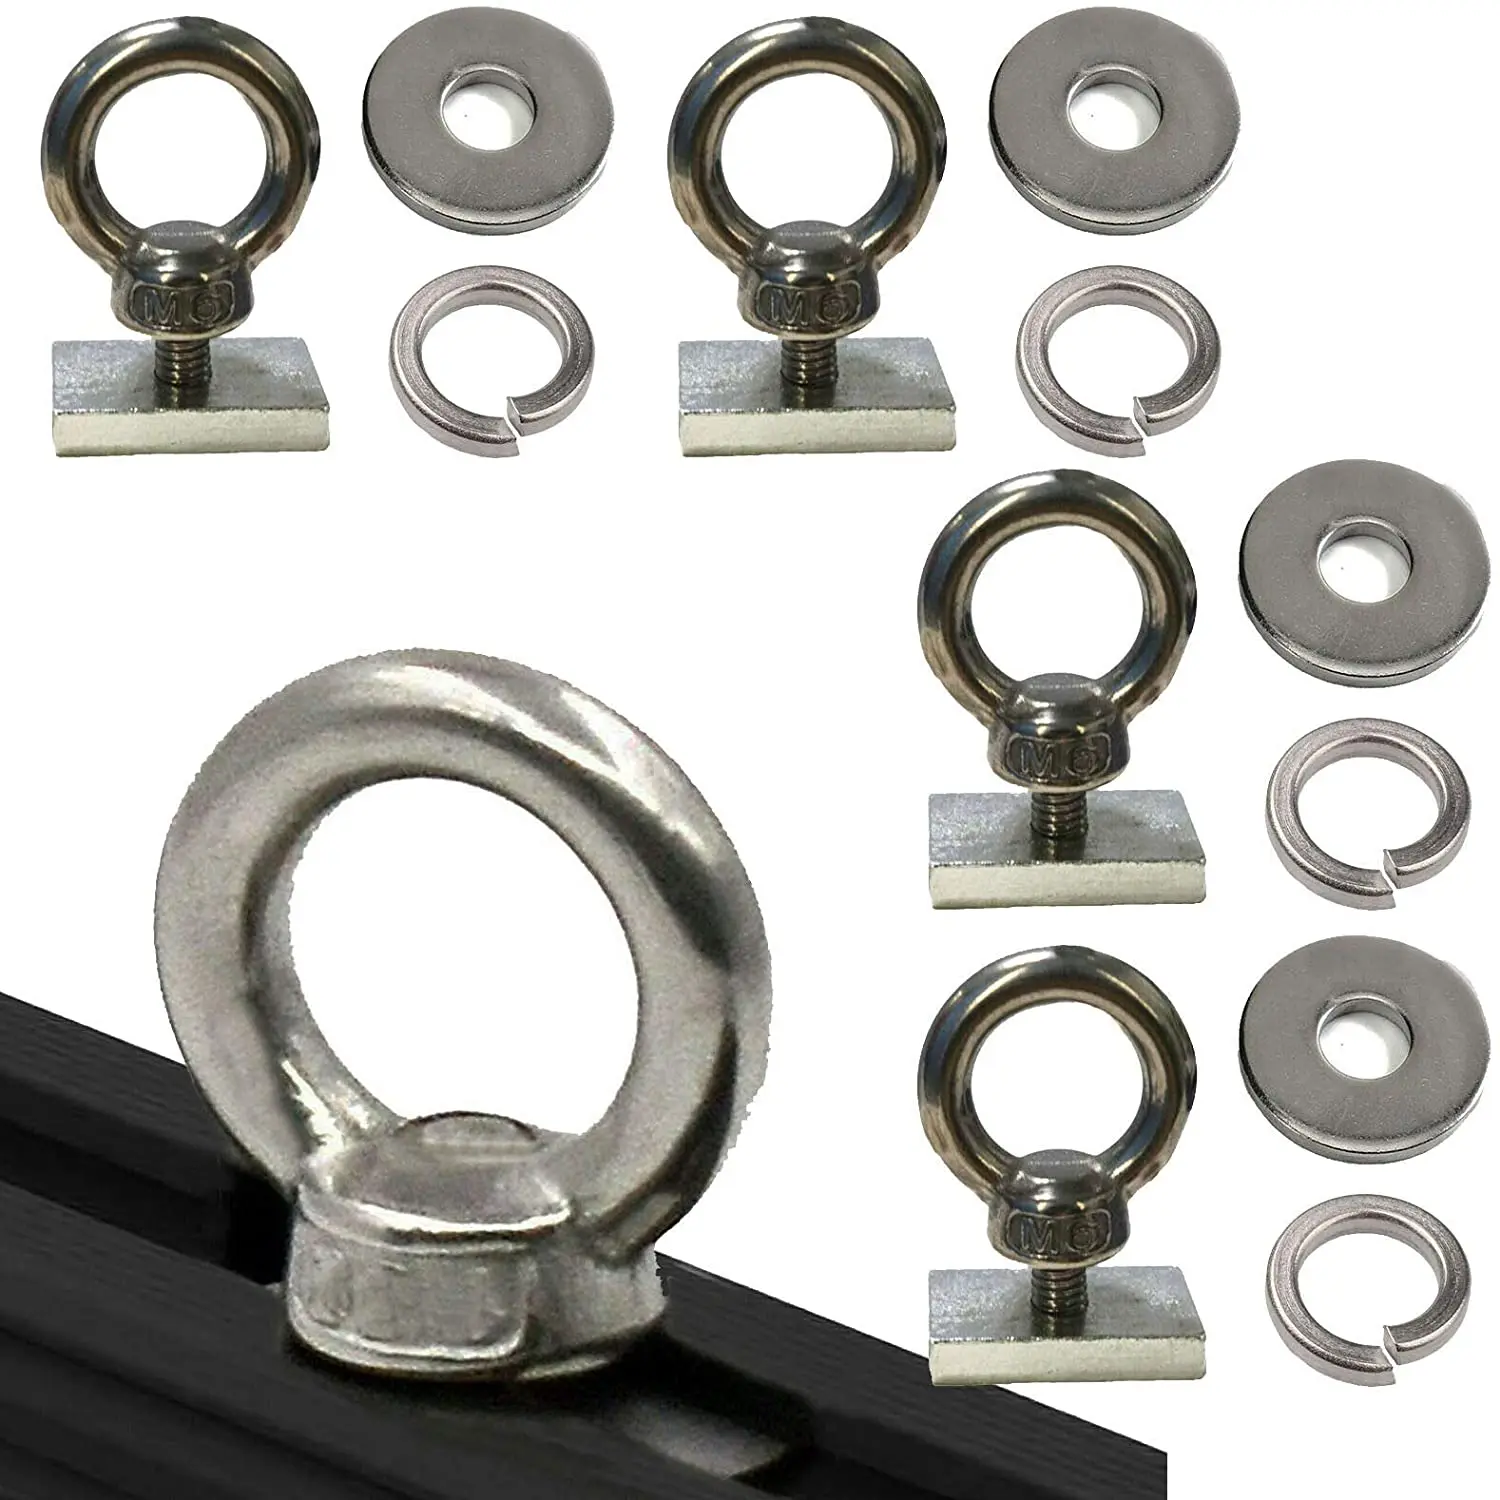 4 Pack Round Pad Eye Tie Down Anchor Ring Stainless Steel M8 Thread